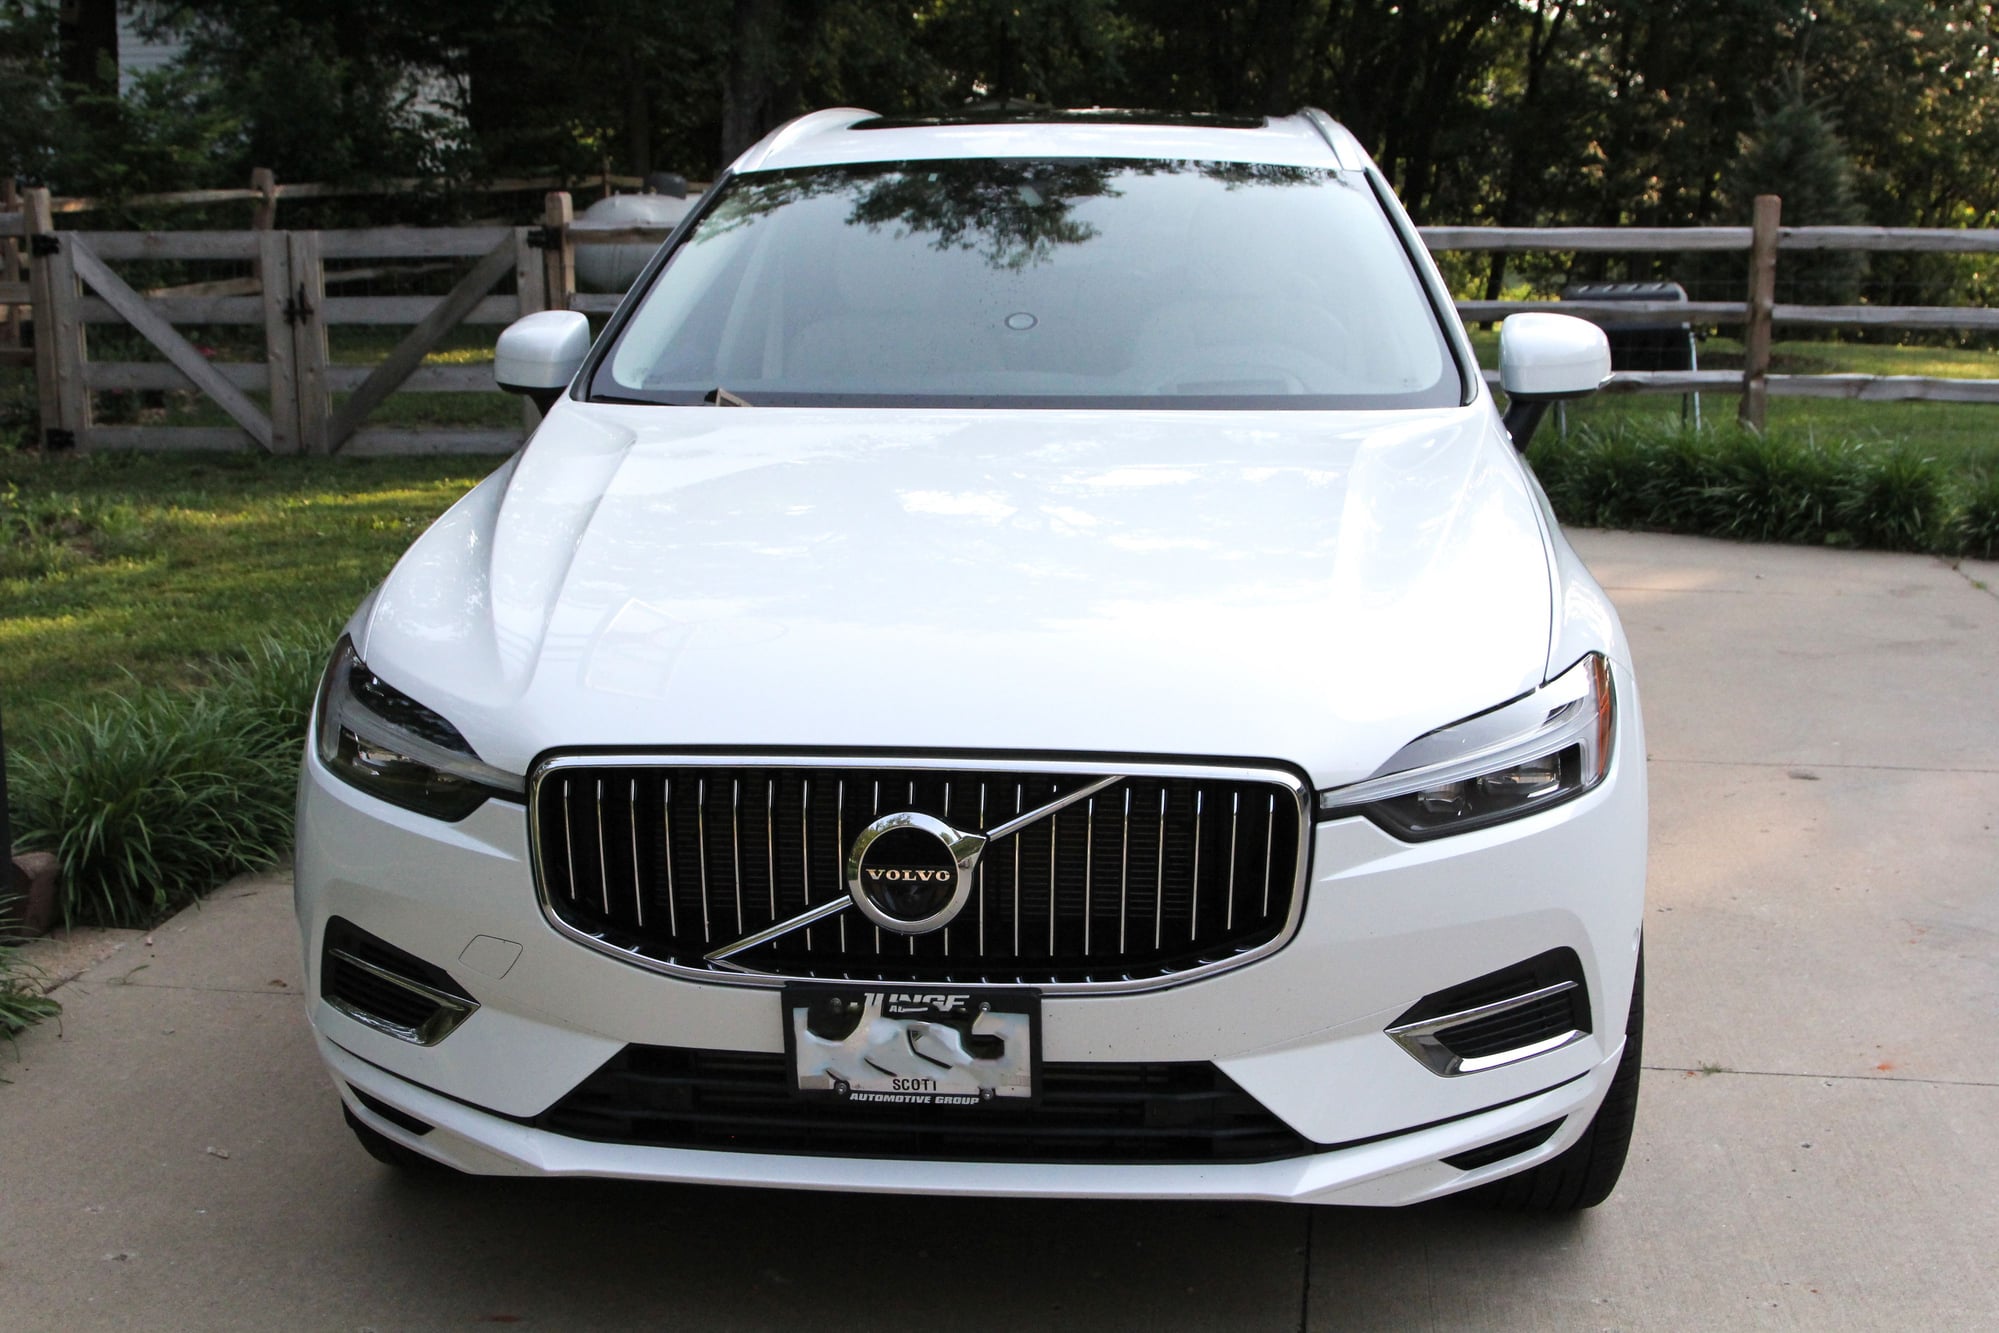 2021 Volvo XC60 - 2021 XC60 recharge - Used - VIN YV4BR0DL1M1765024 - 37,000 Miles - 4 cyl - AWD - Automatic - SUV - White - Cedar Rapids, IA 52405, United States